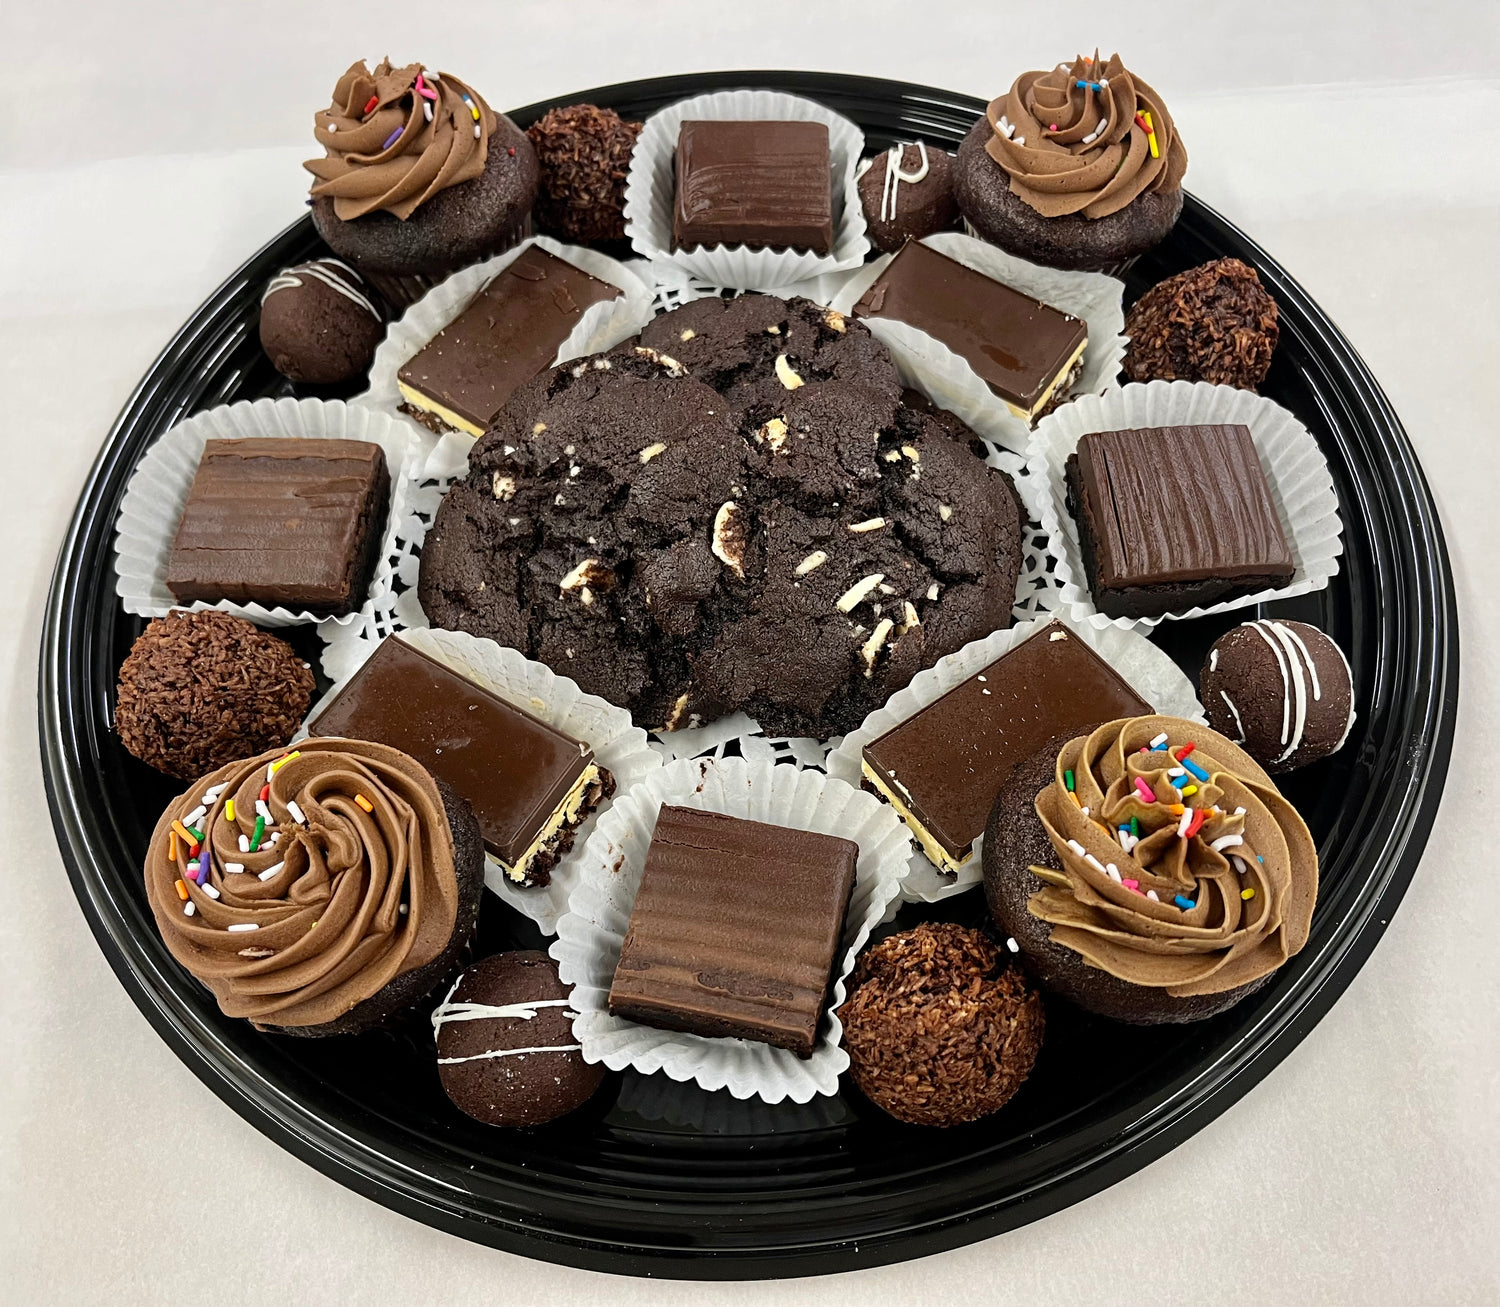 Selection of decadent chocolate treats perfect for a party or event